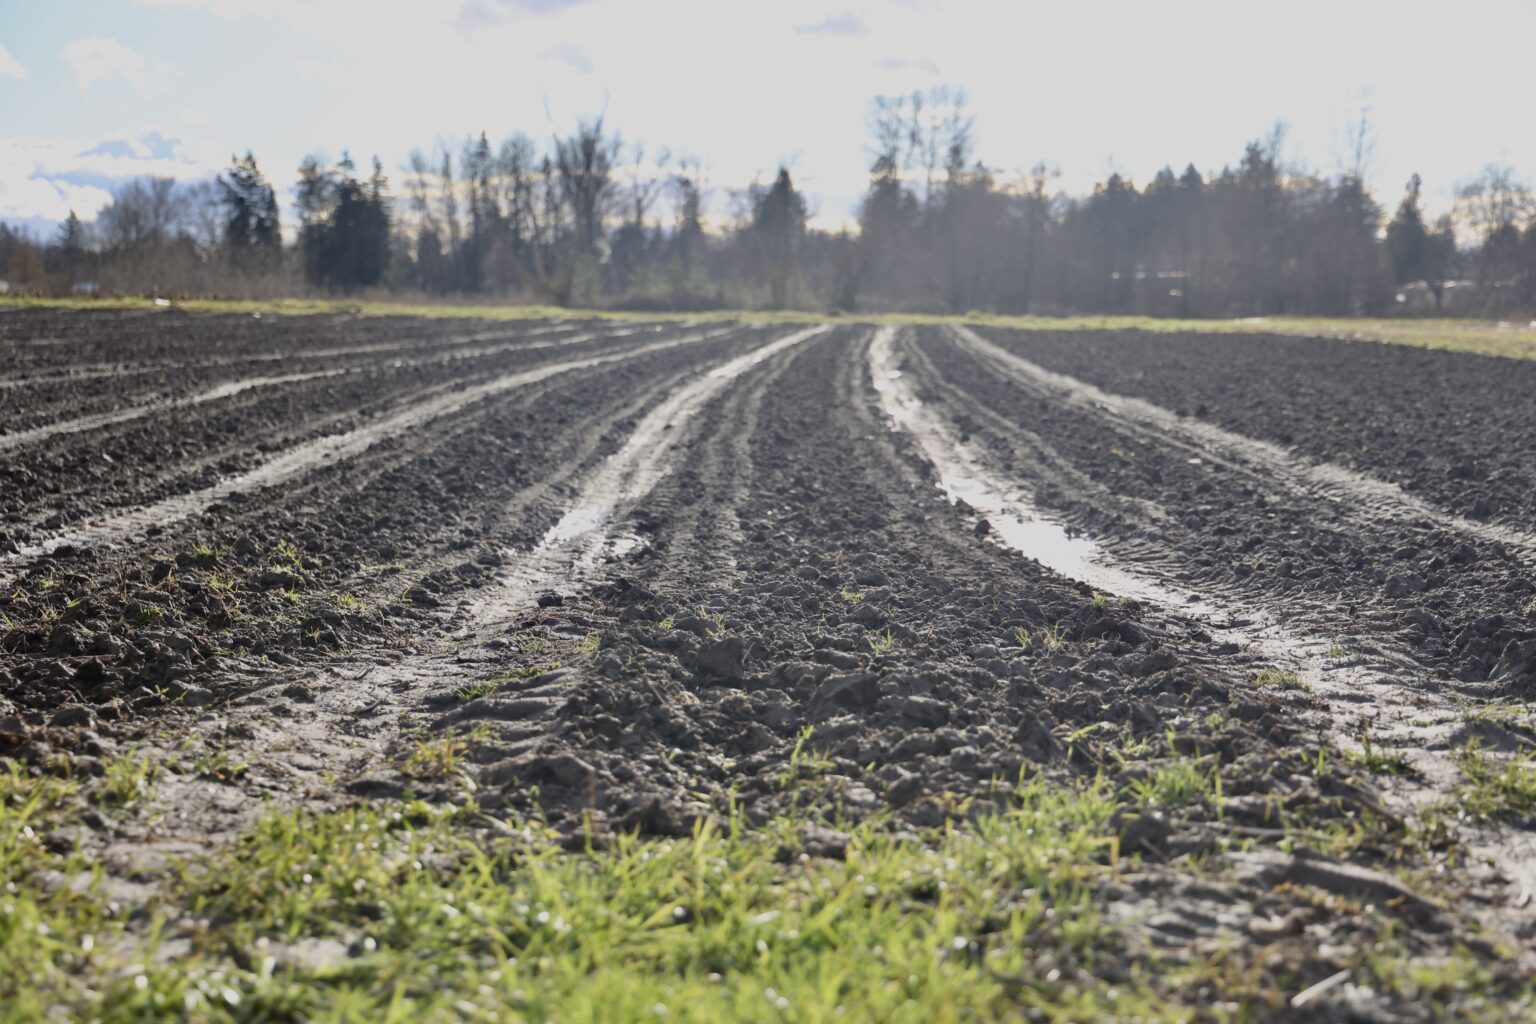 Mud covers a field at Terra Verde farm in Everson